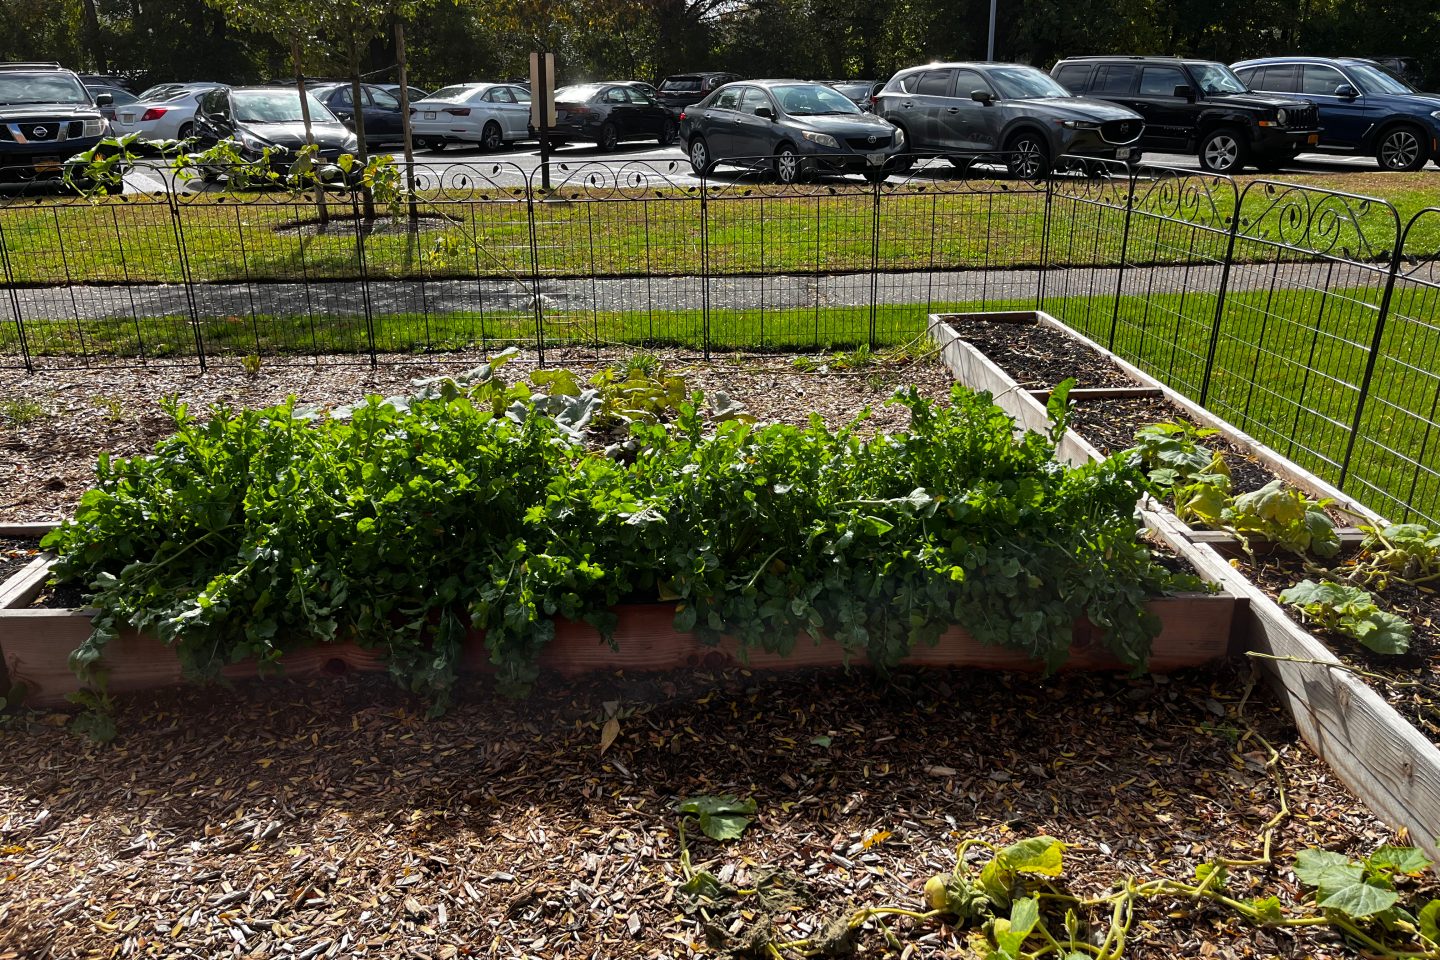 A view of the lush green vegetables growing in the ӰƬ University community garden beds.